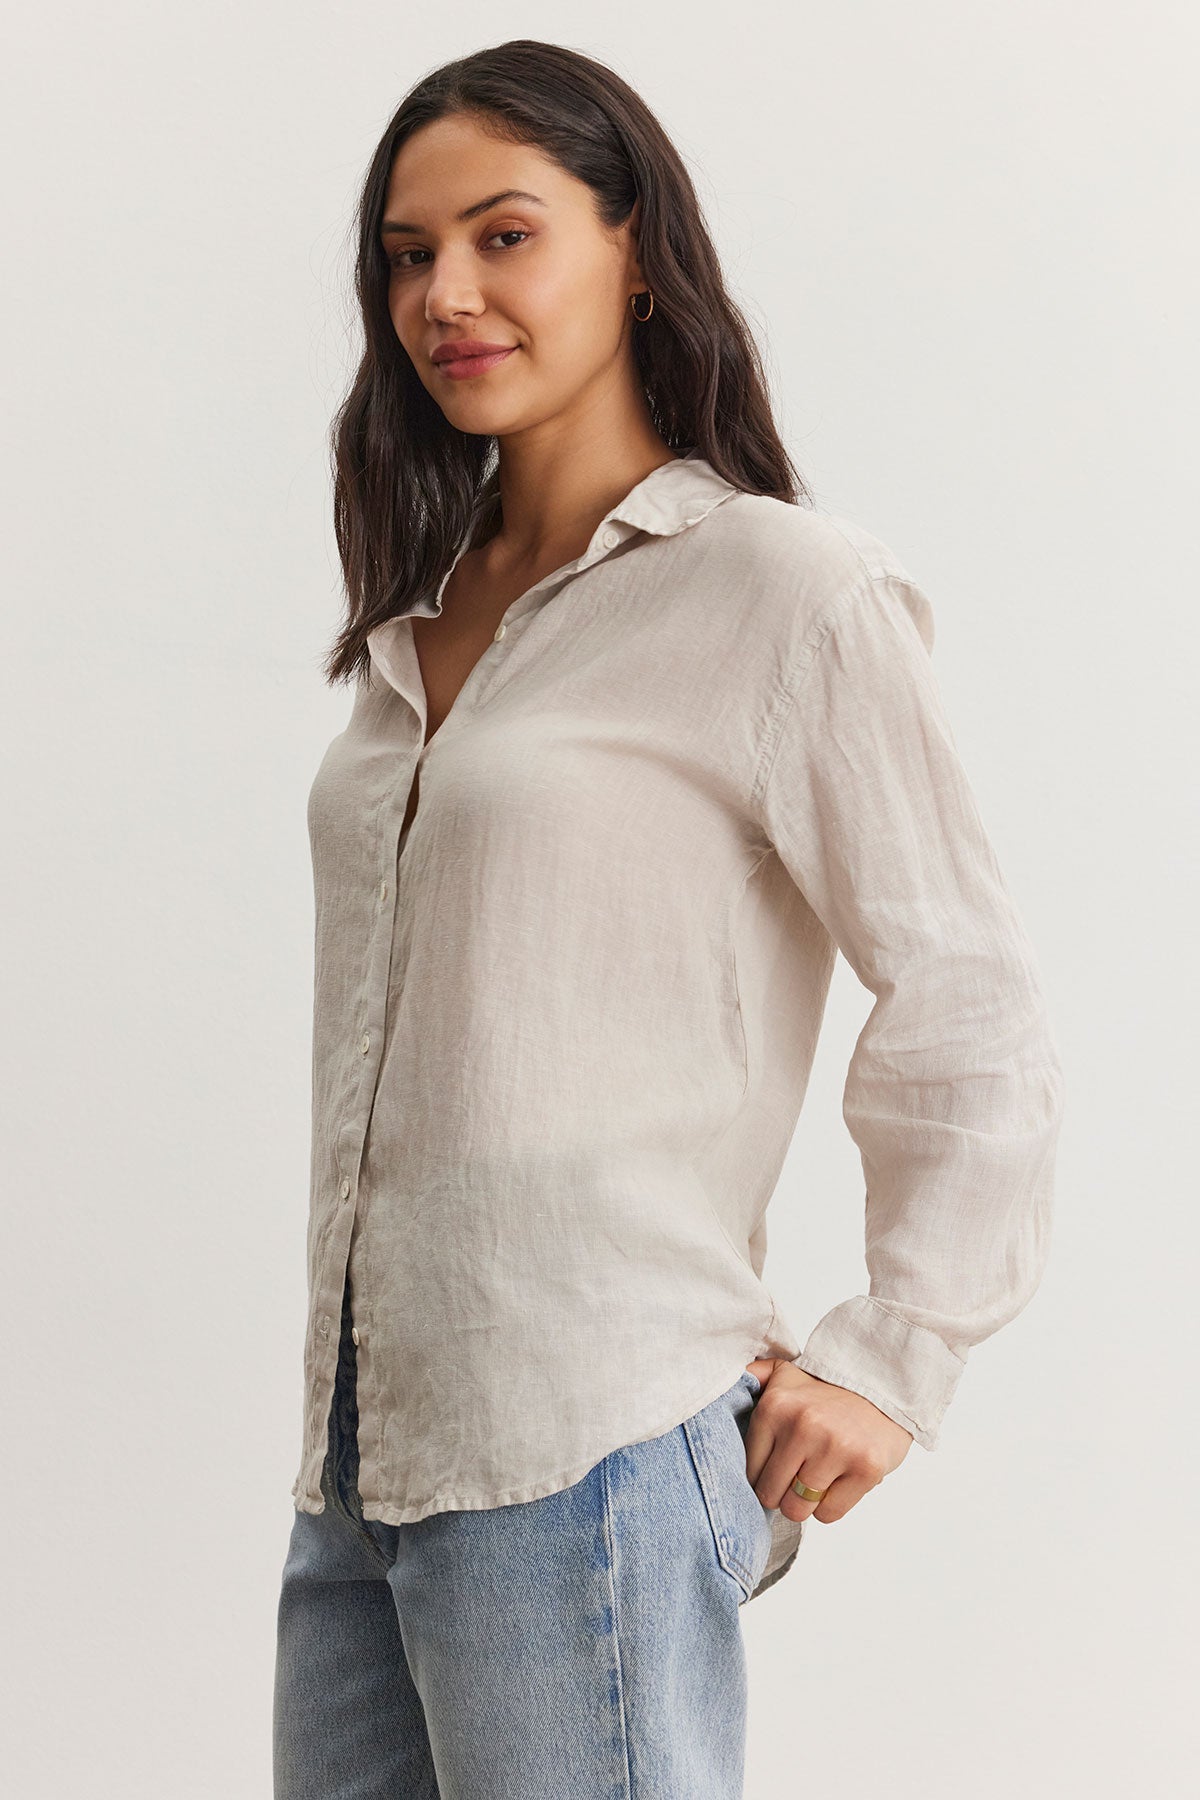   A woman wearing a Velvet by Graham & Spencer Willow Linen Button-Up Shirt and blue jeans, standing with one hand on her hip and looking relaxed. 